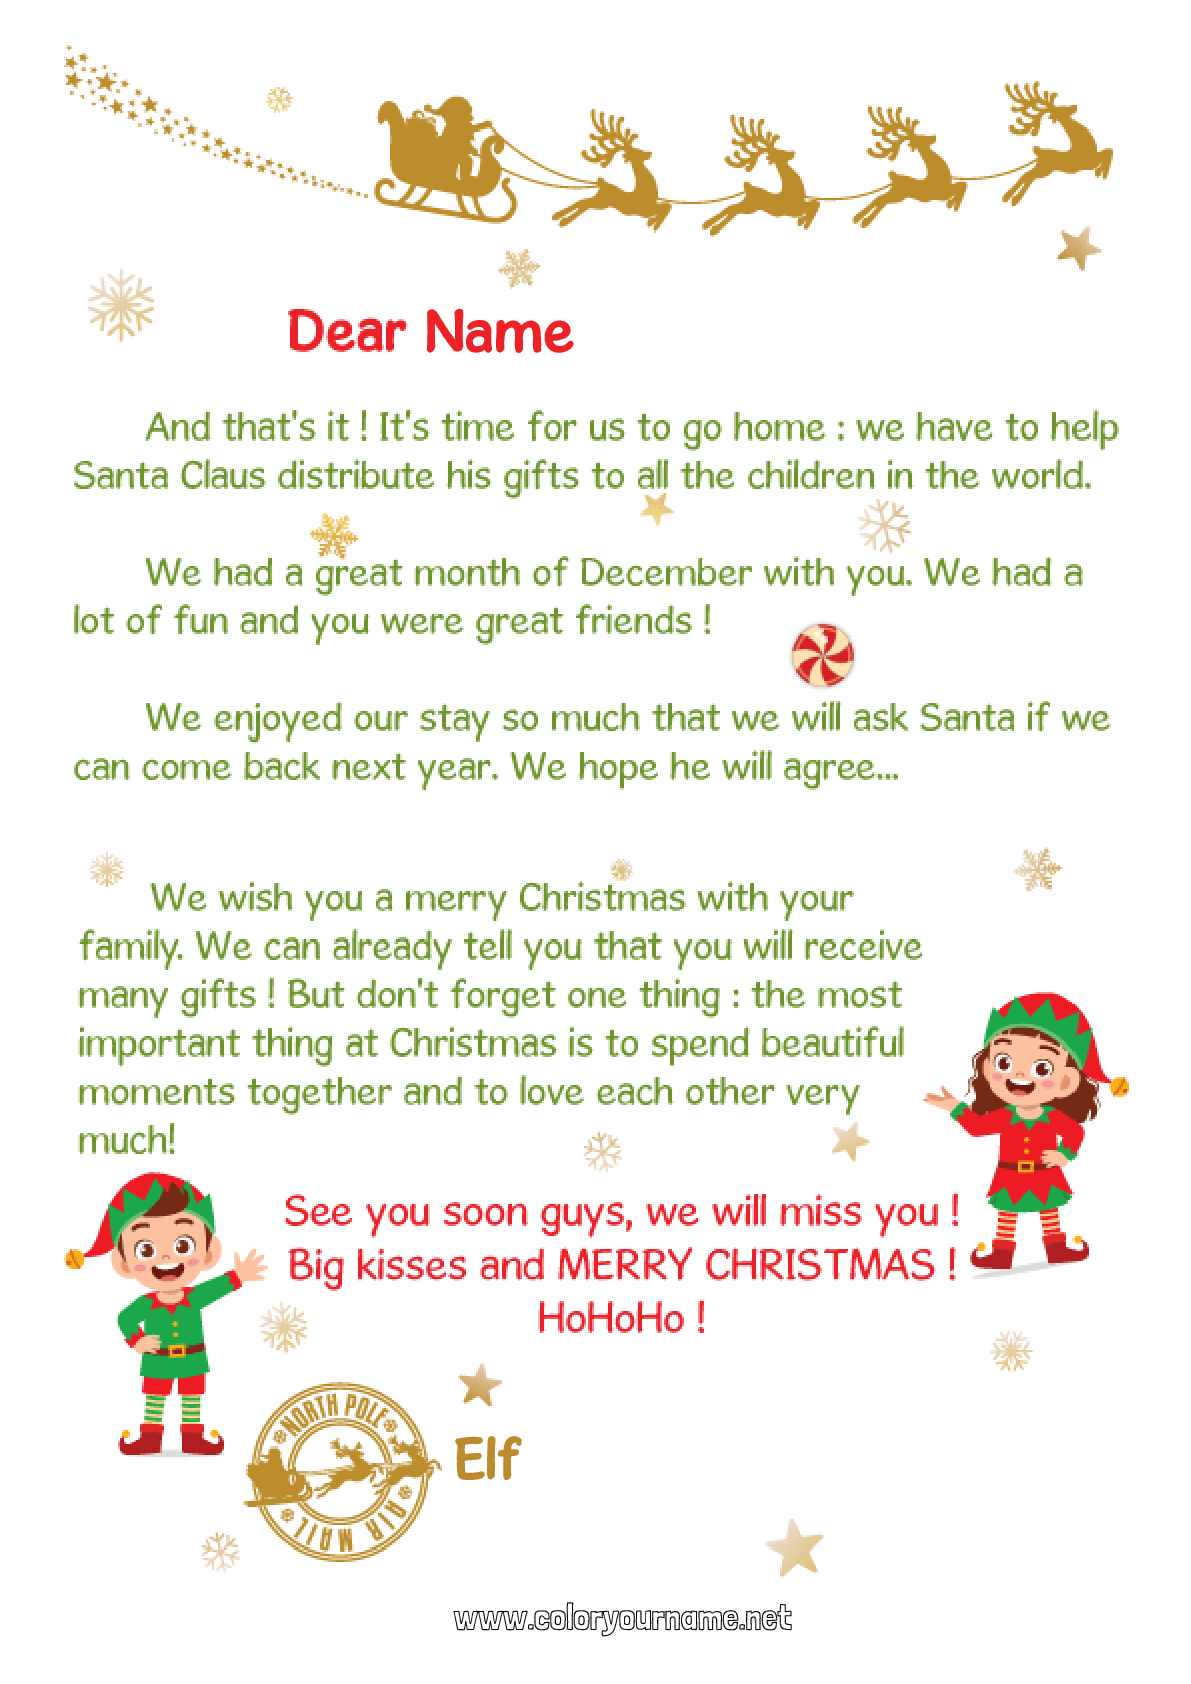 Coloring page No.451 - Christmas elves Letters from prankster elves Elf ...